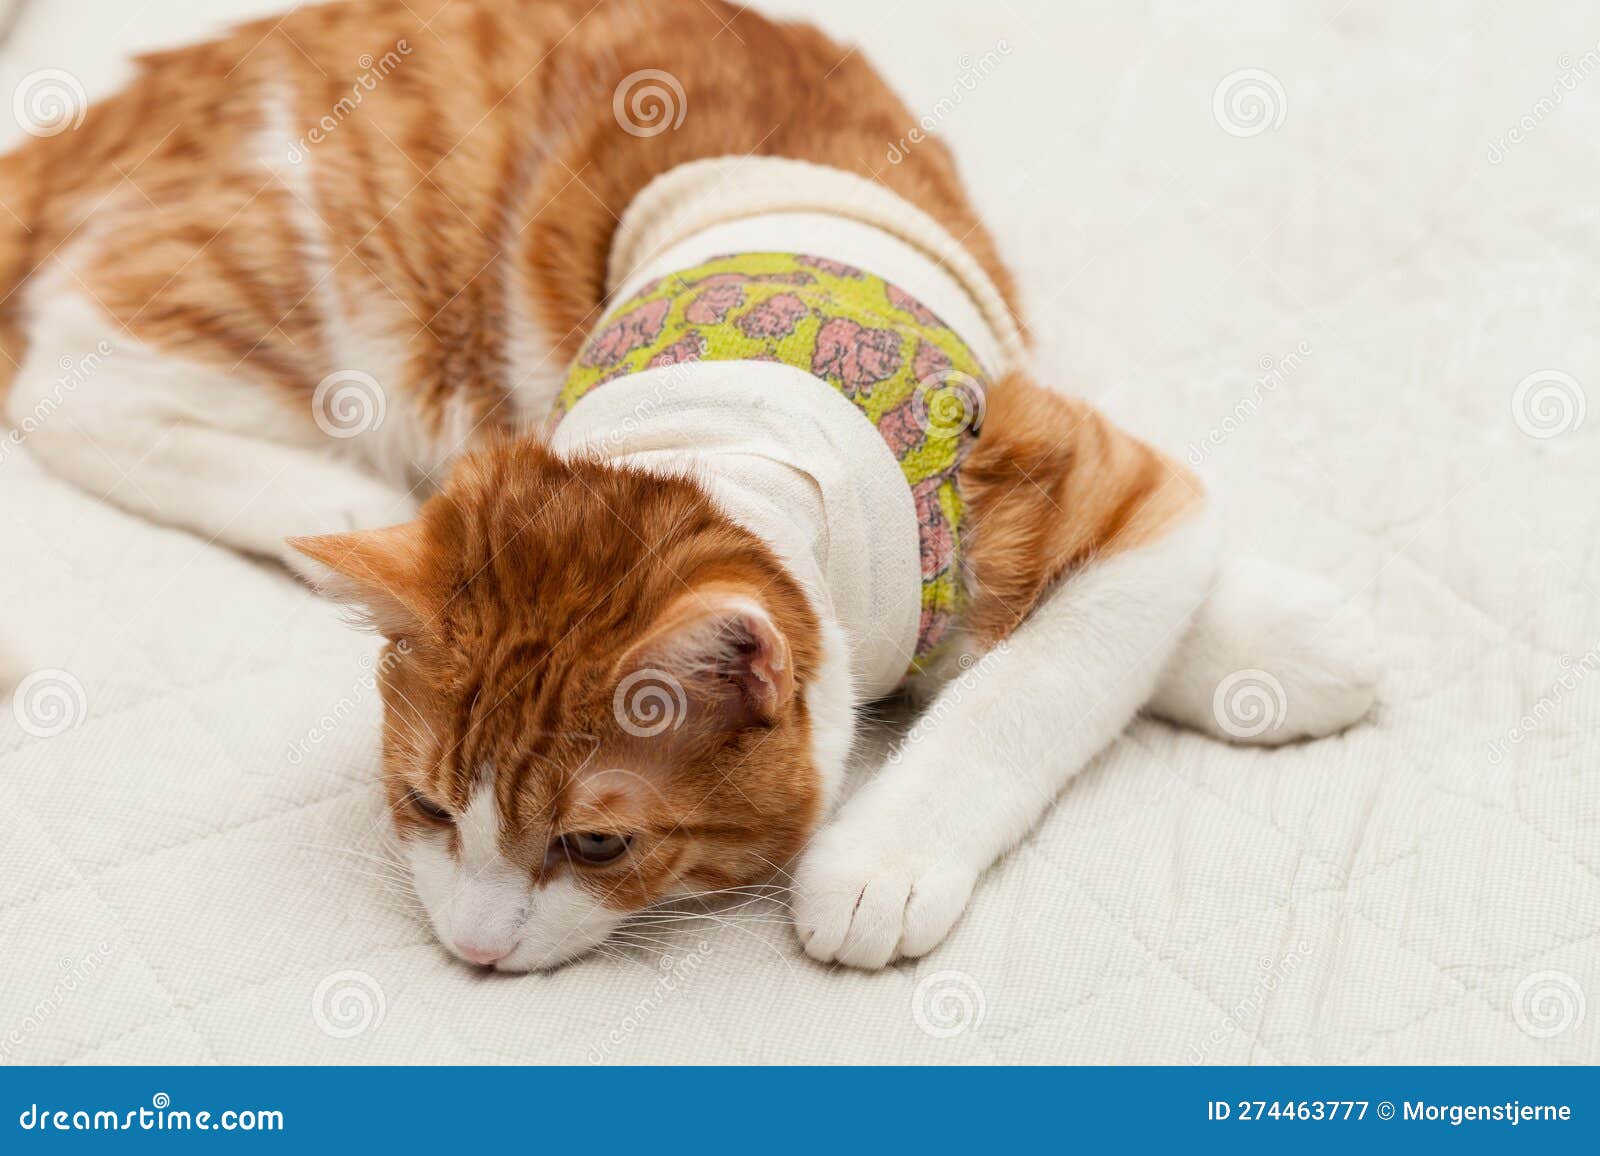 domestic yoing cat in bandage with broken paw